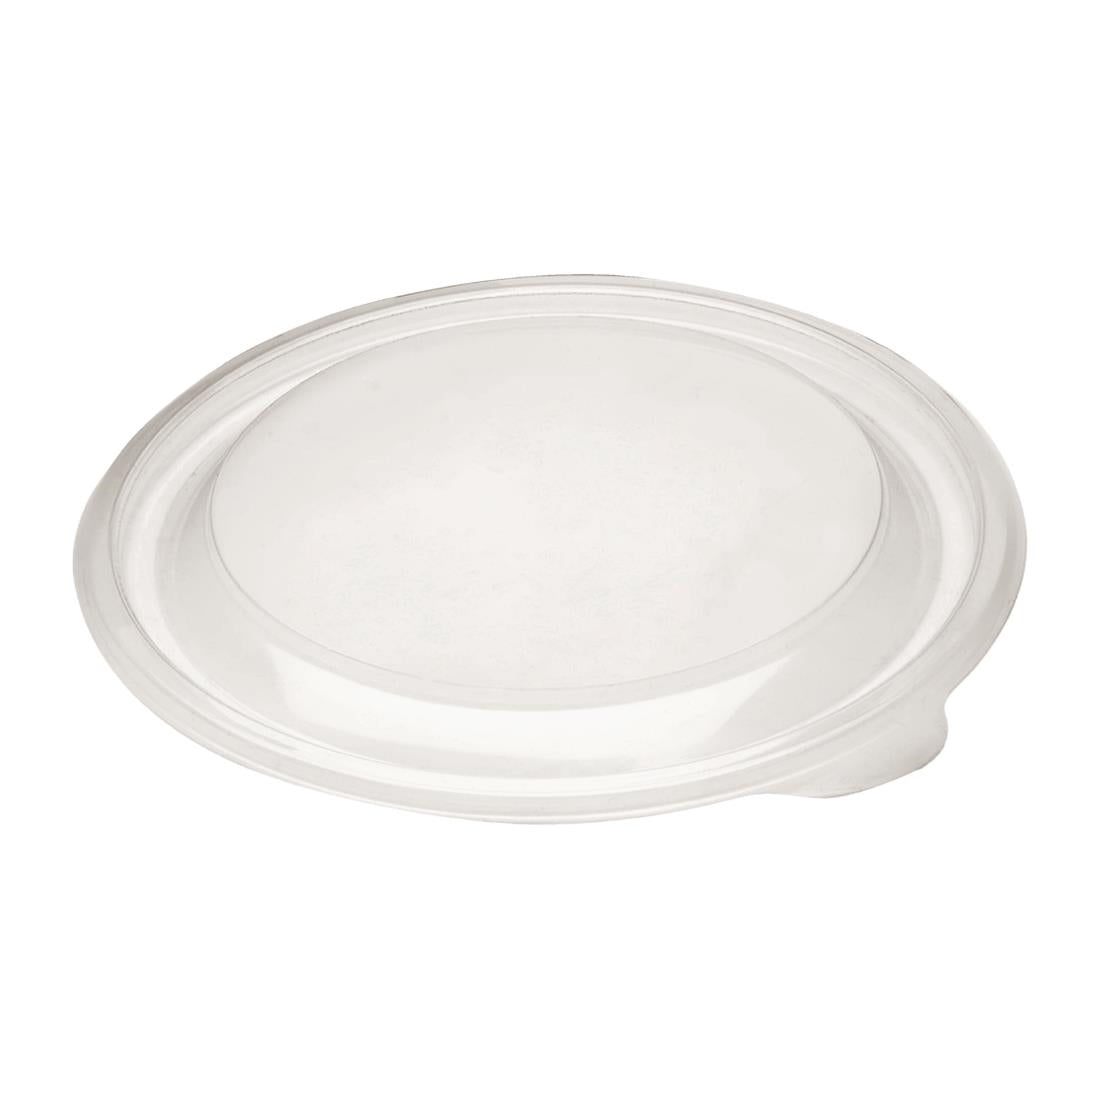 Fastpac Small Round Food Container Lids 375ml / 13oz (Pack of 500) JD Catering Equipment Solutions Ltd